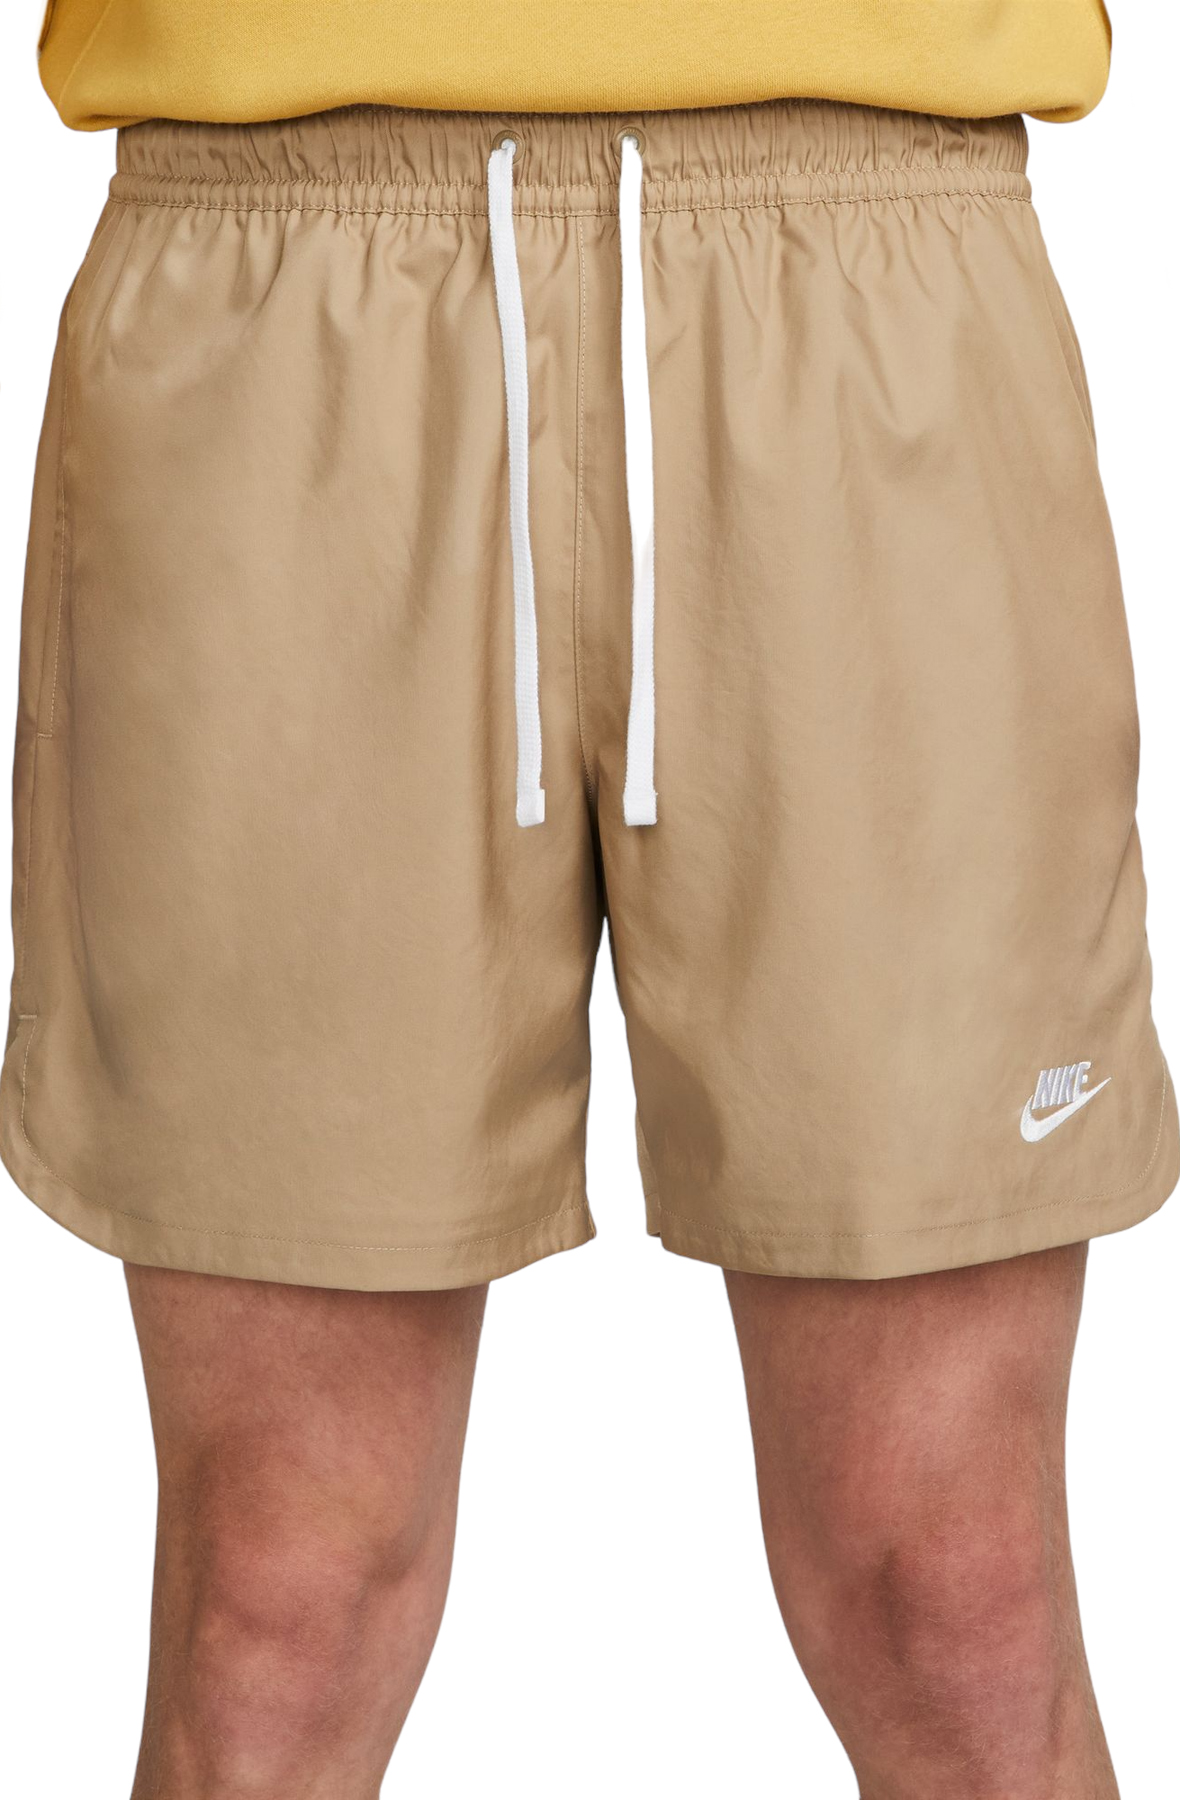 WOVEN LINED FLOW SHORTS DM6829 247